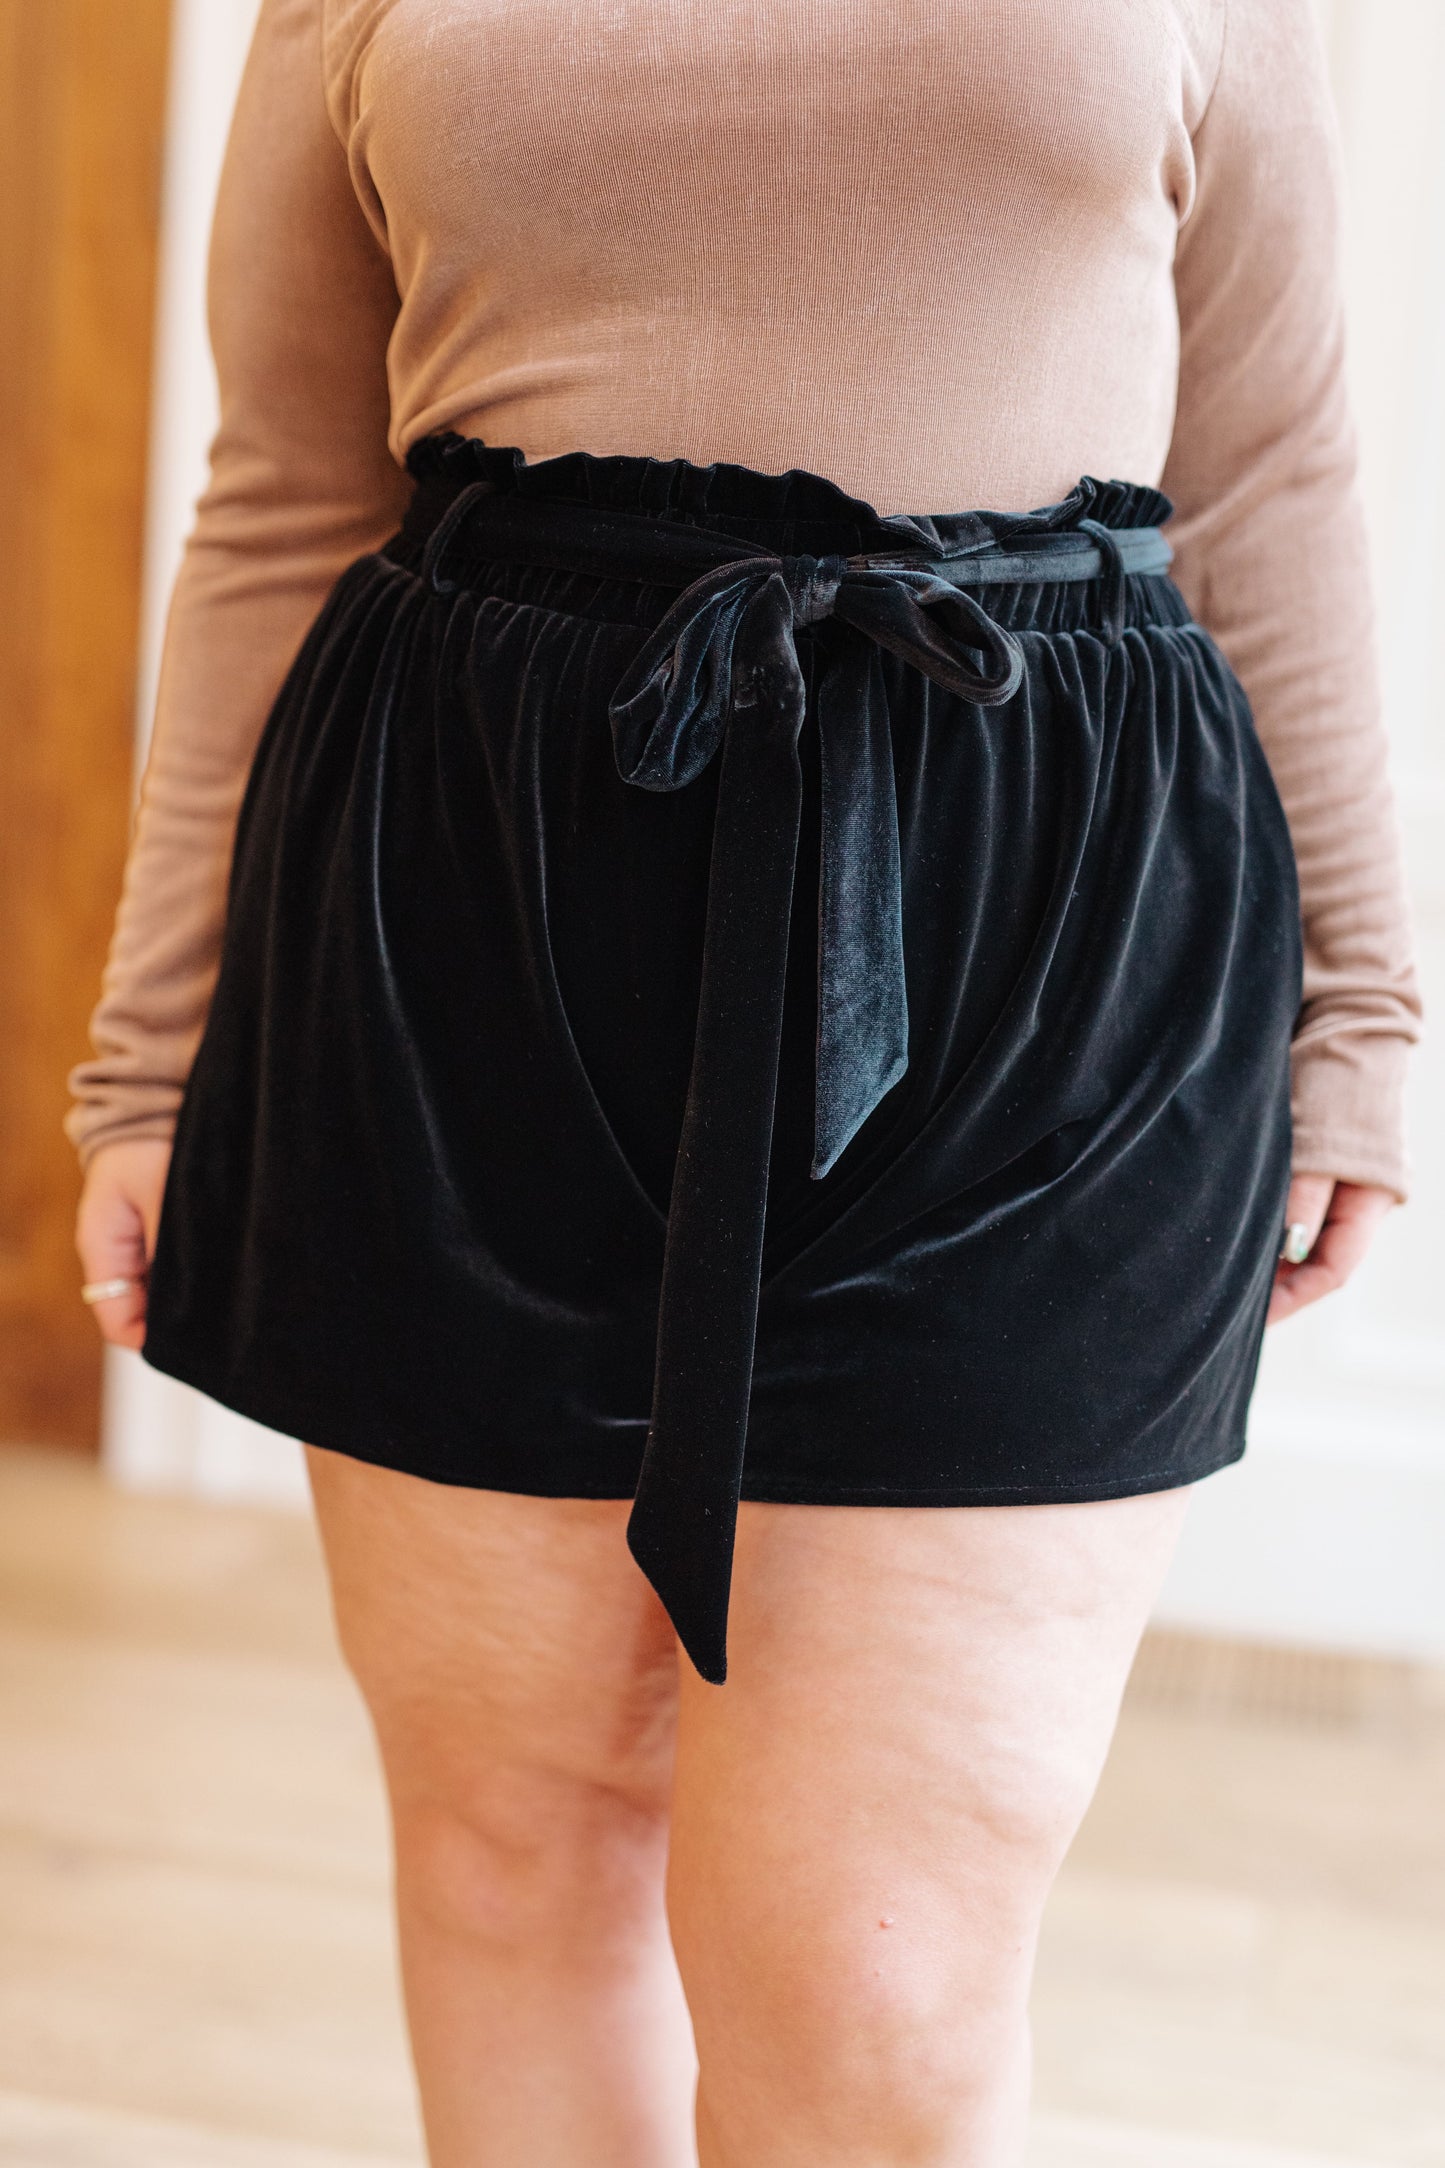 Fall in love with our luxurious Wrapped in Velvet Shorts! Featuring a high rise, these silky black velvet shorts have a gathered elastic paper bag waistband and self tie belt for an adjustable fit. Stylish pockets add the perfect touch. Feel confident and beautiful in these oh-so-comfy shorts! S - 3X